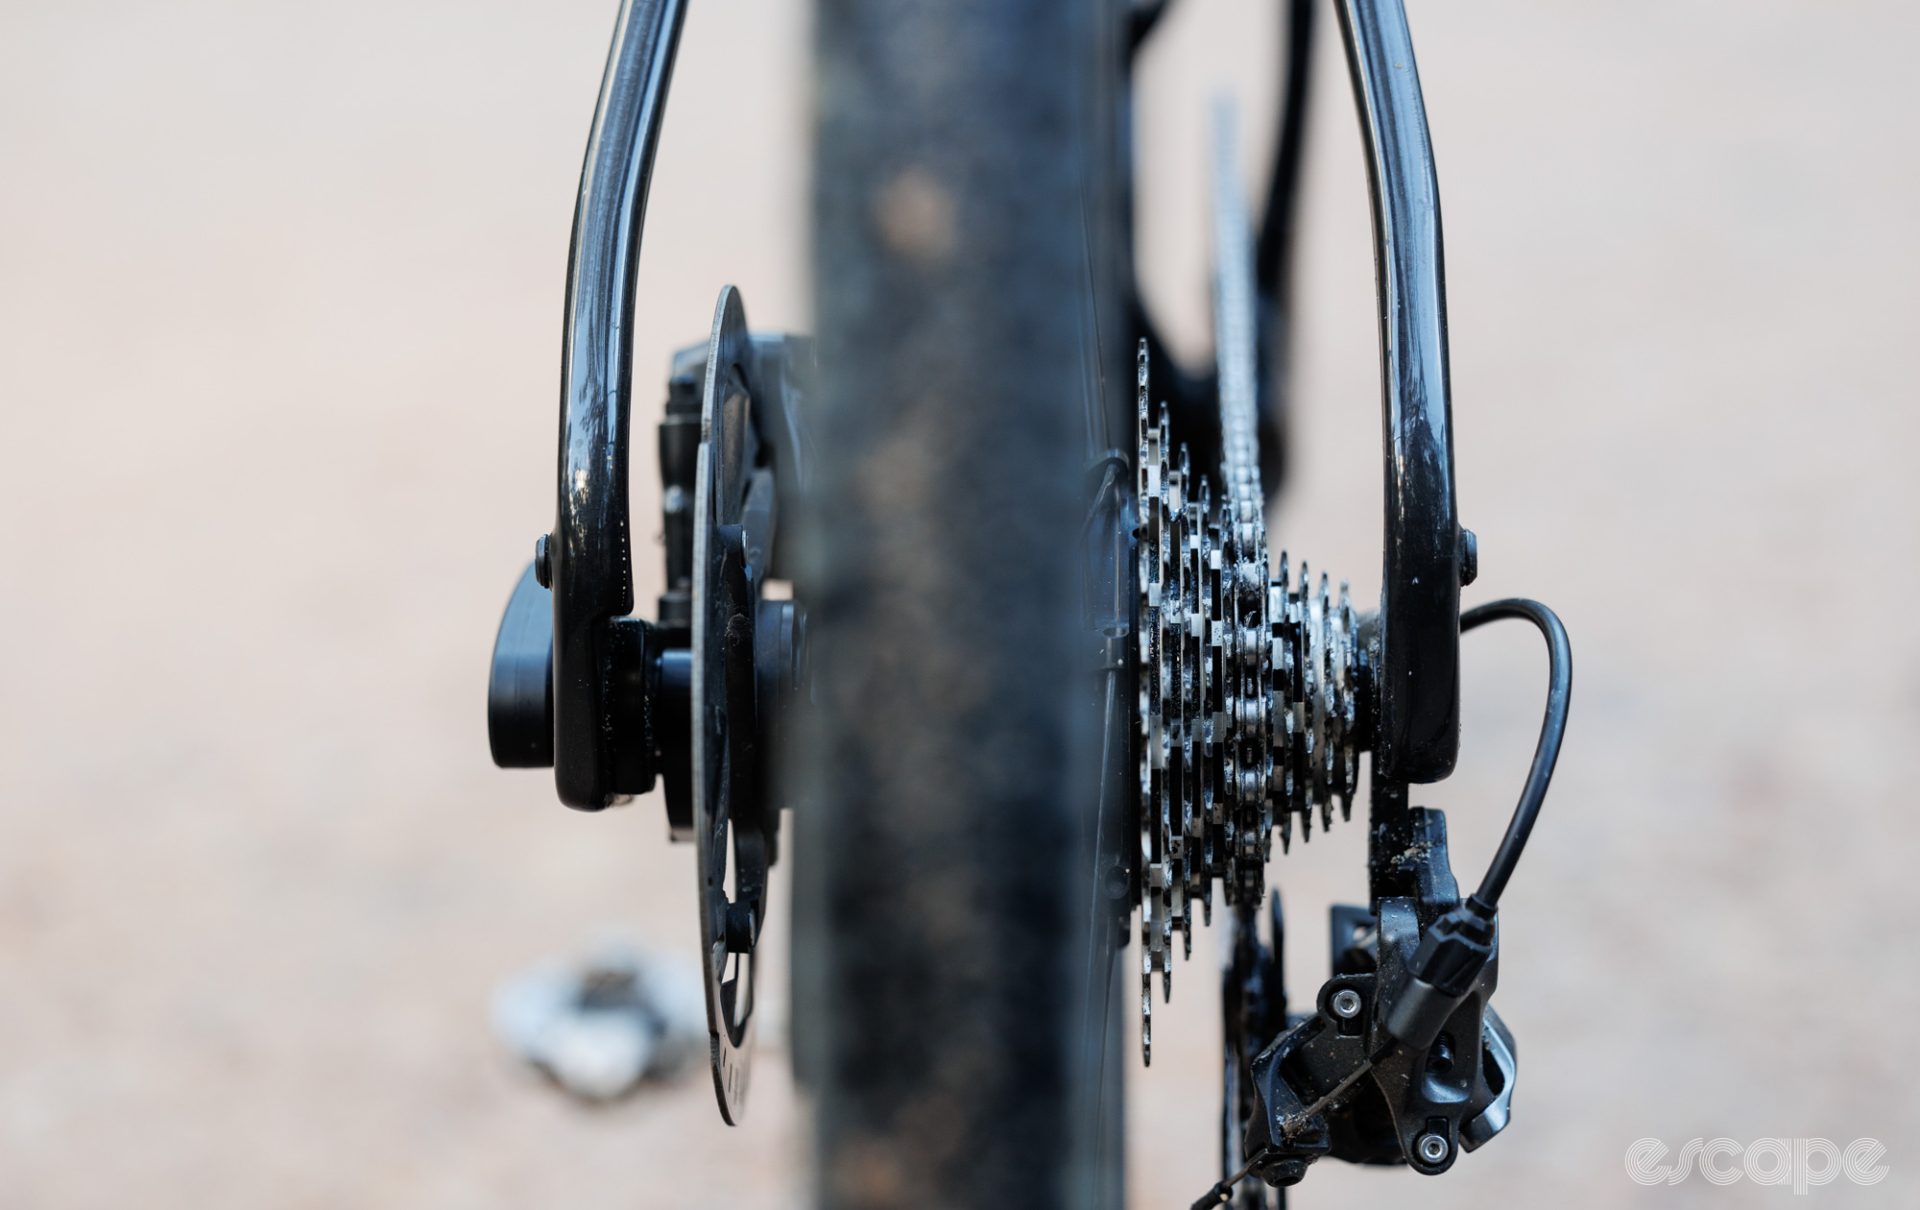 One of the benefits of Classified is a cleaner, straighter chainline, shown here from behind the cassette, looking forward at the chain running to the chainring.